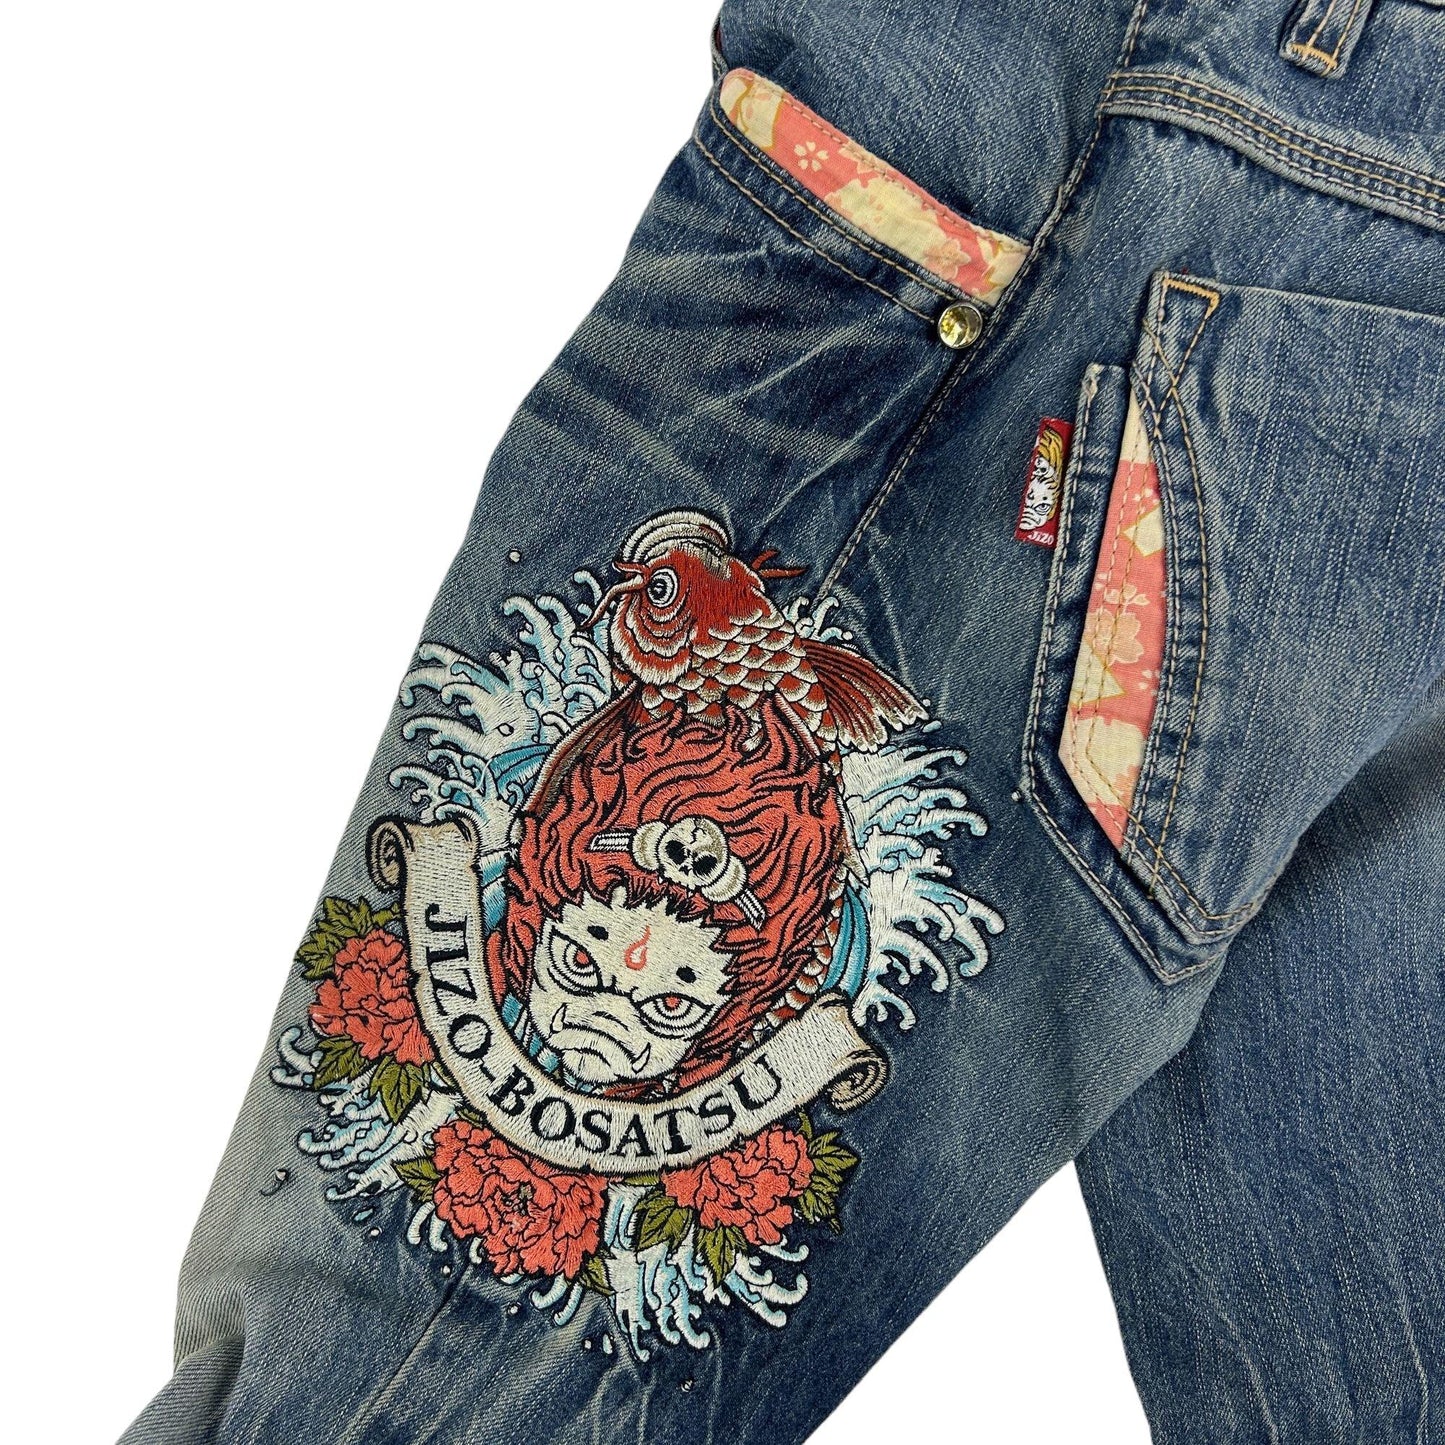 Vintage Monster Jizo Japanese Embroidered Denim Jeans Size W28 - Known Source